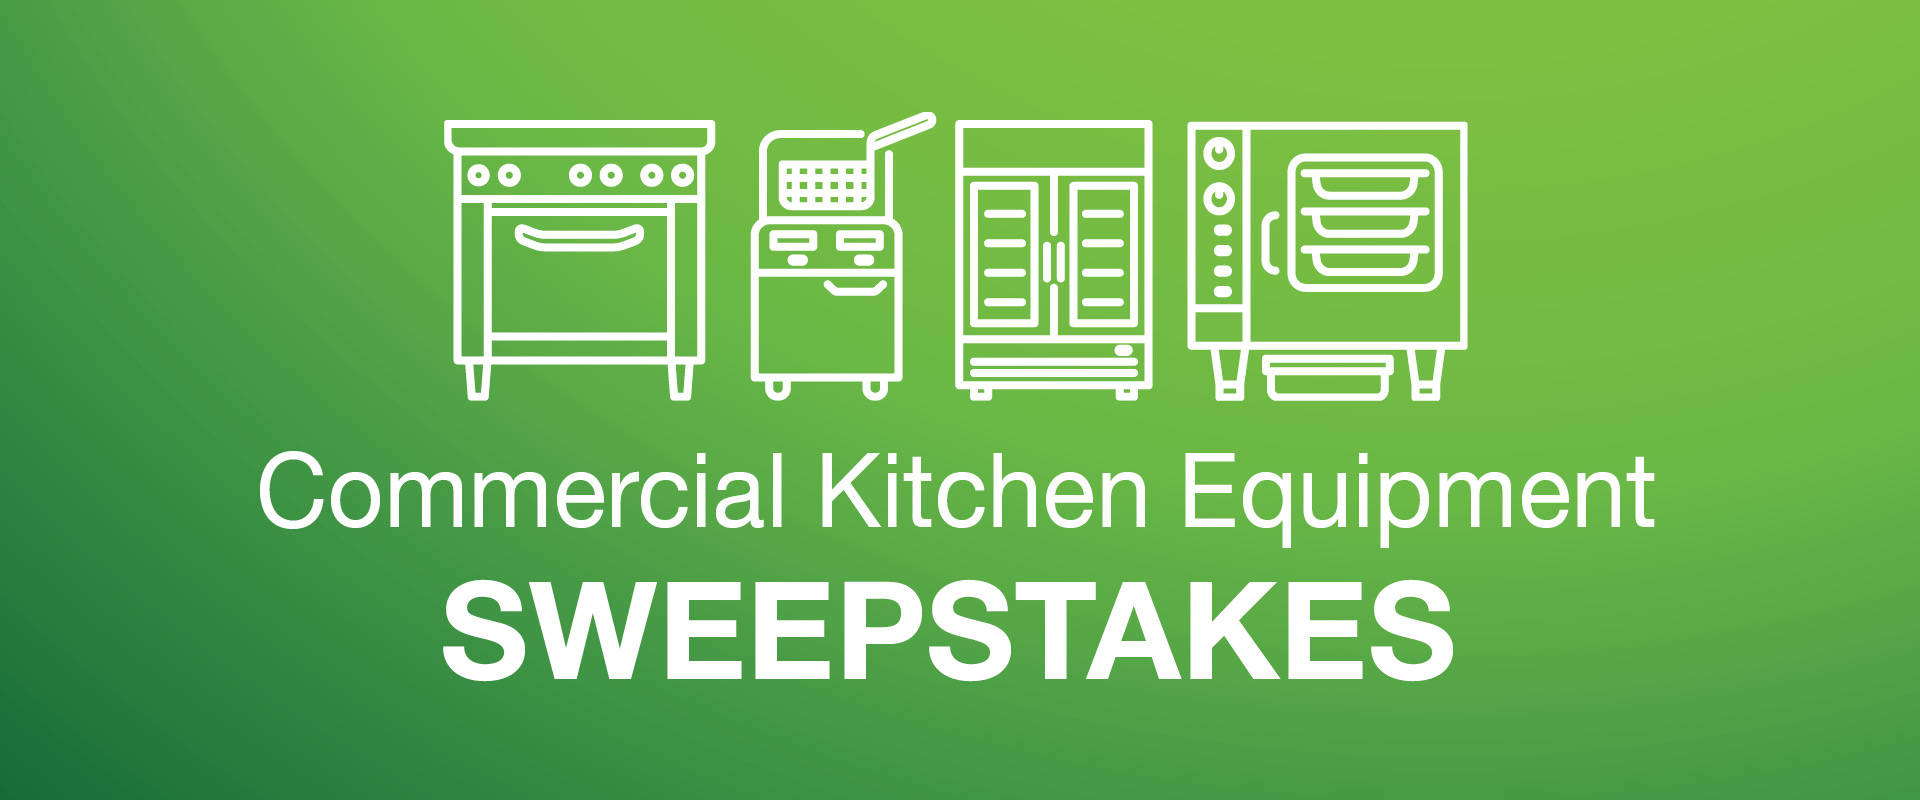 Commercial Kitchen Equipment Sweepstakes